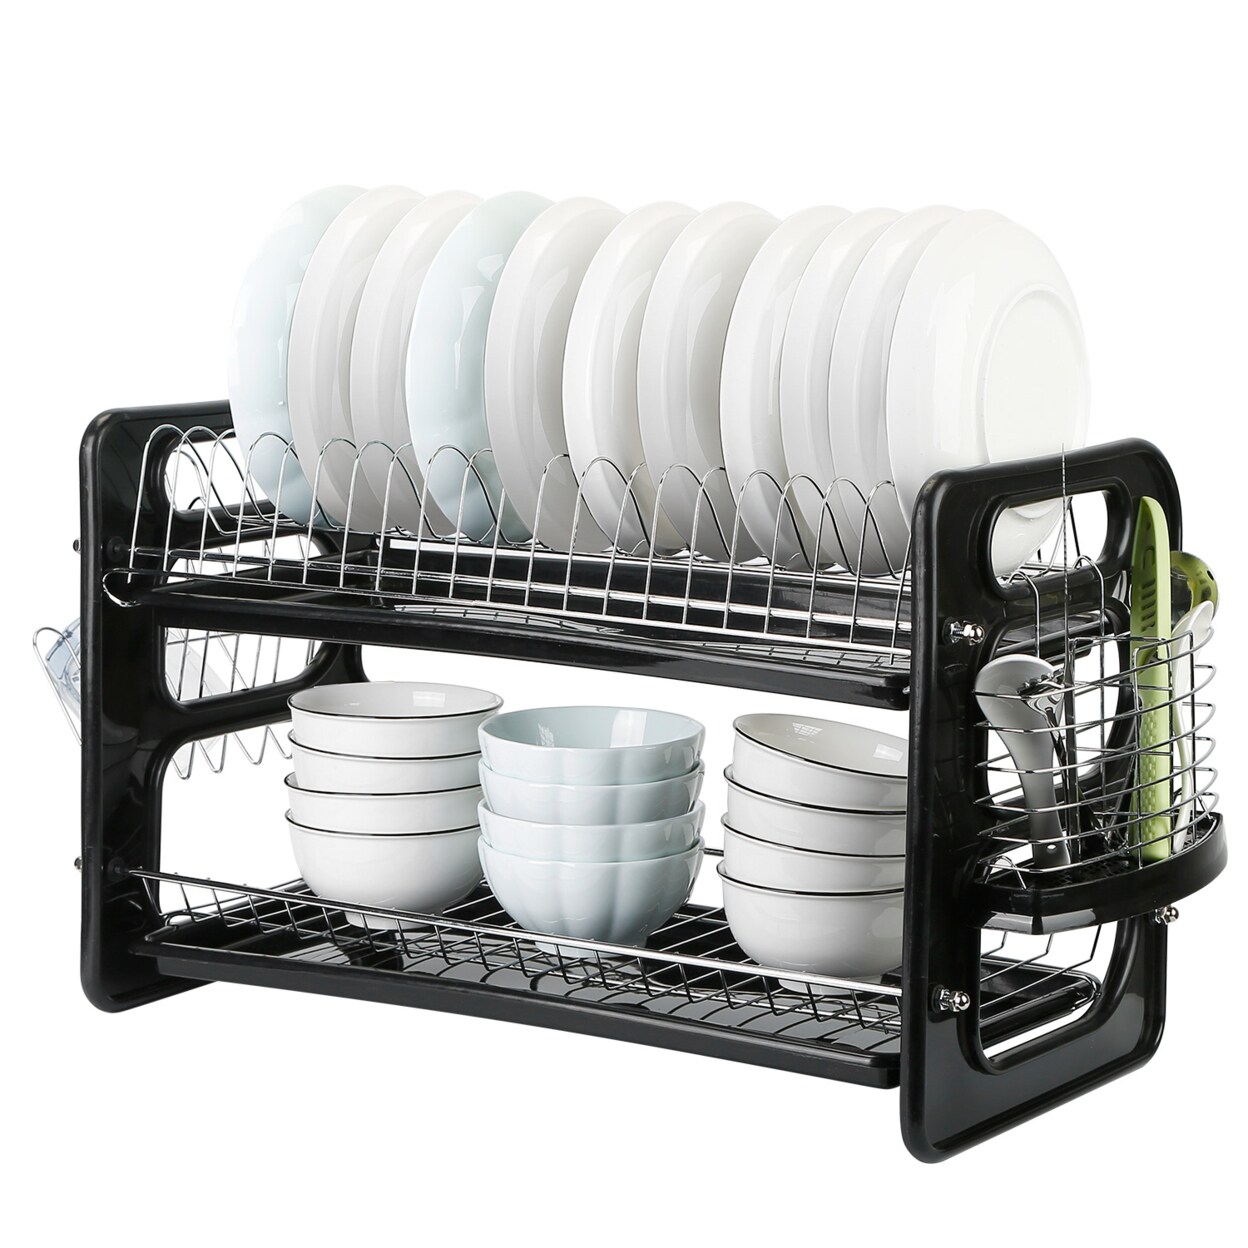 Dish Drying Rack, Stainless Steel Dish Rack and Drainboard Set